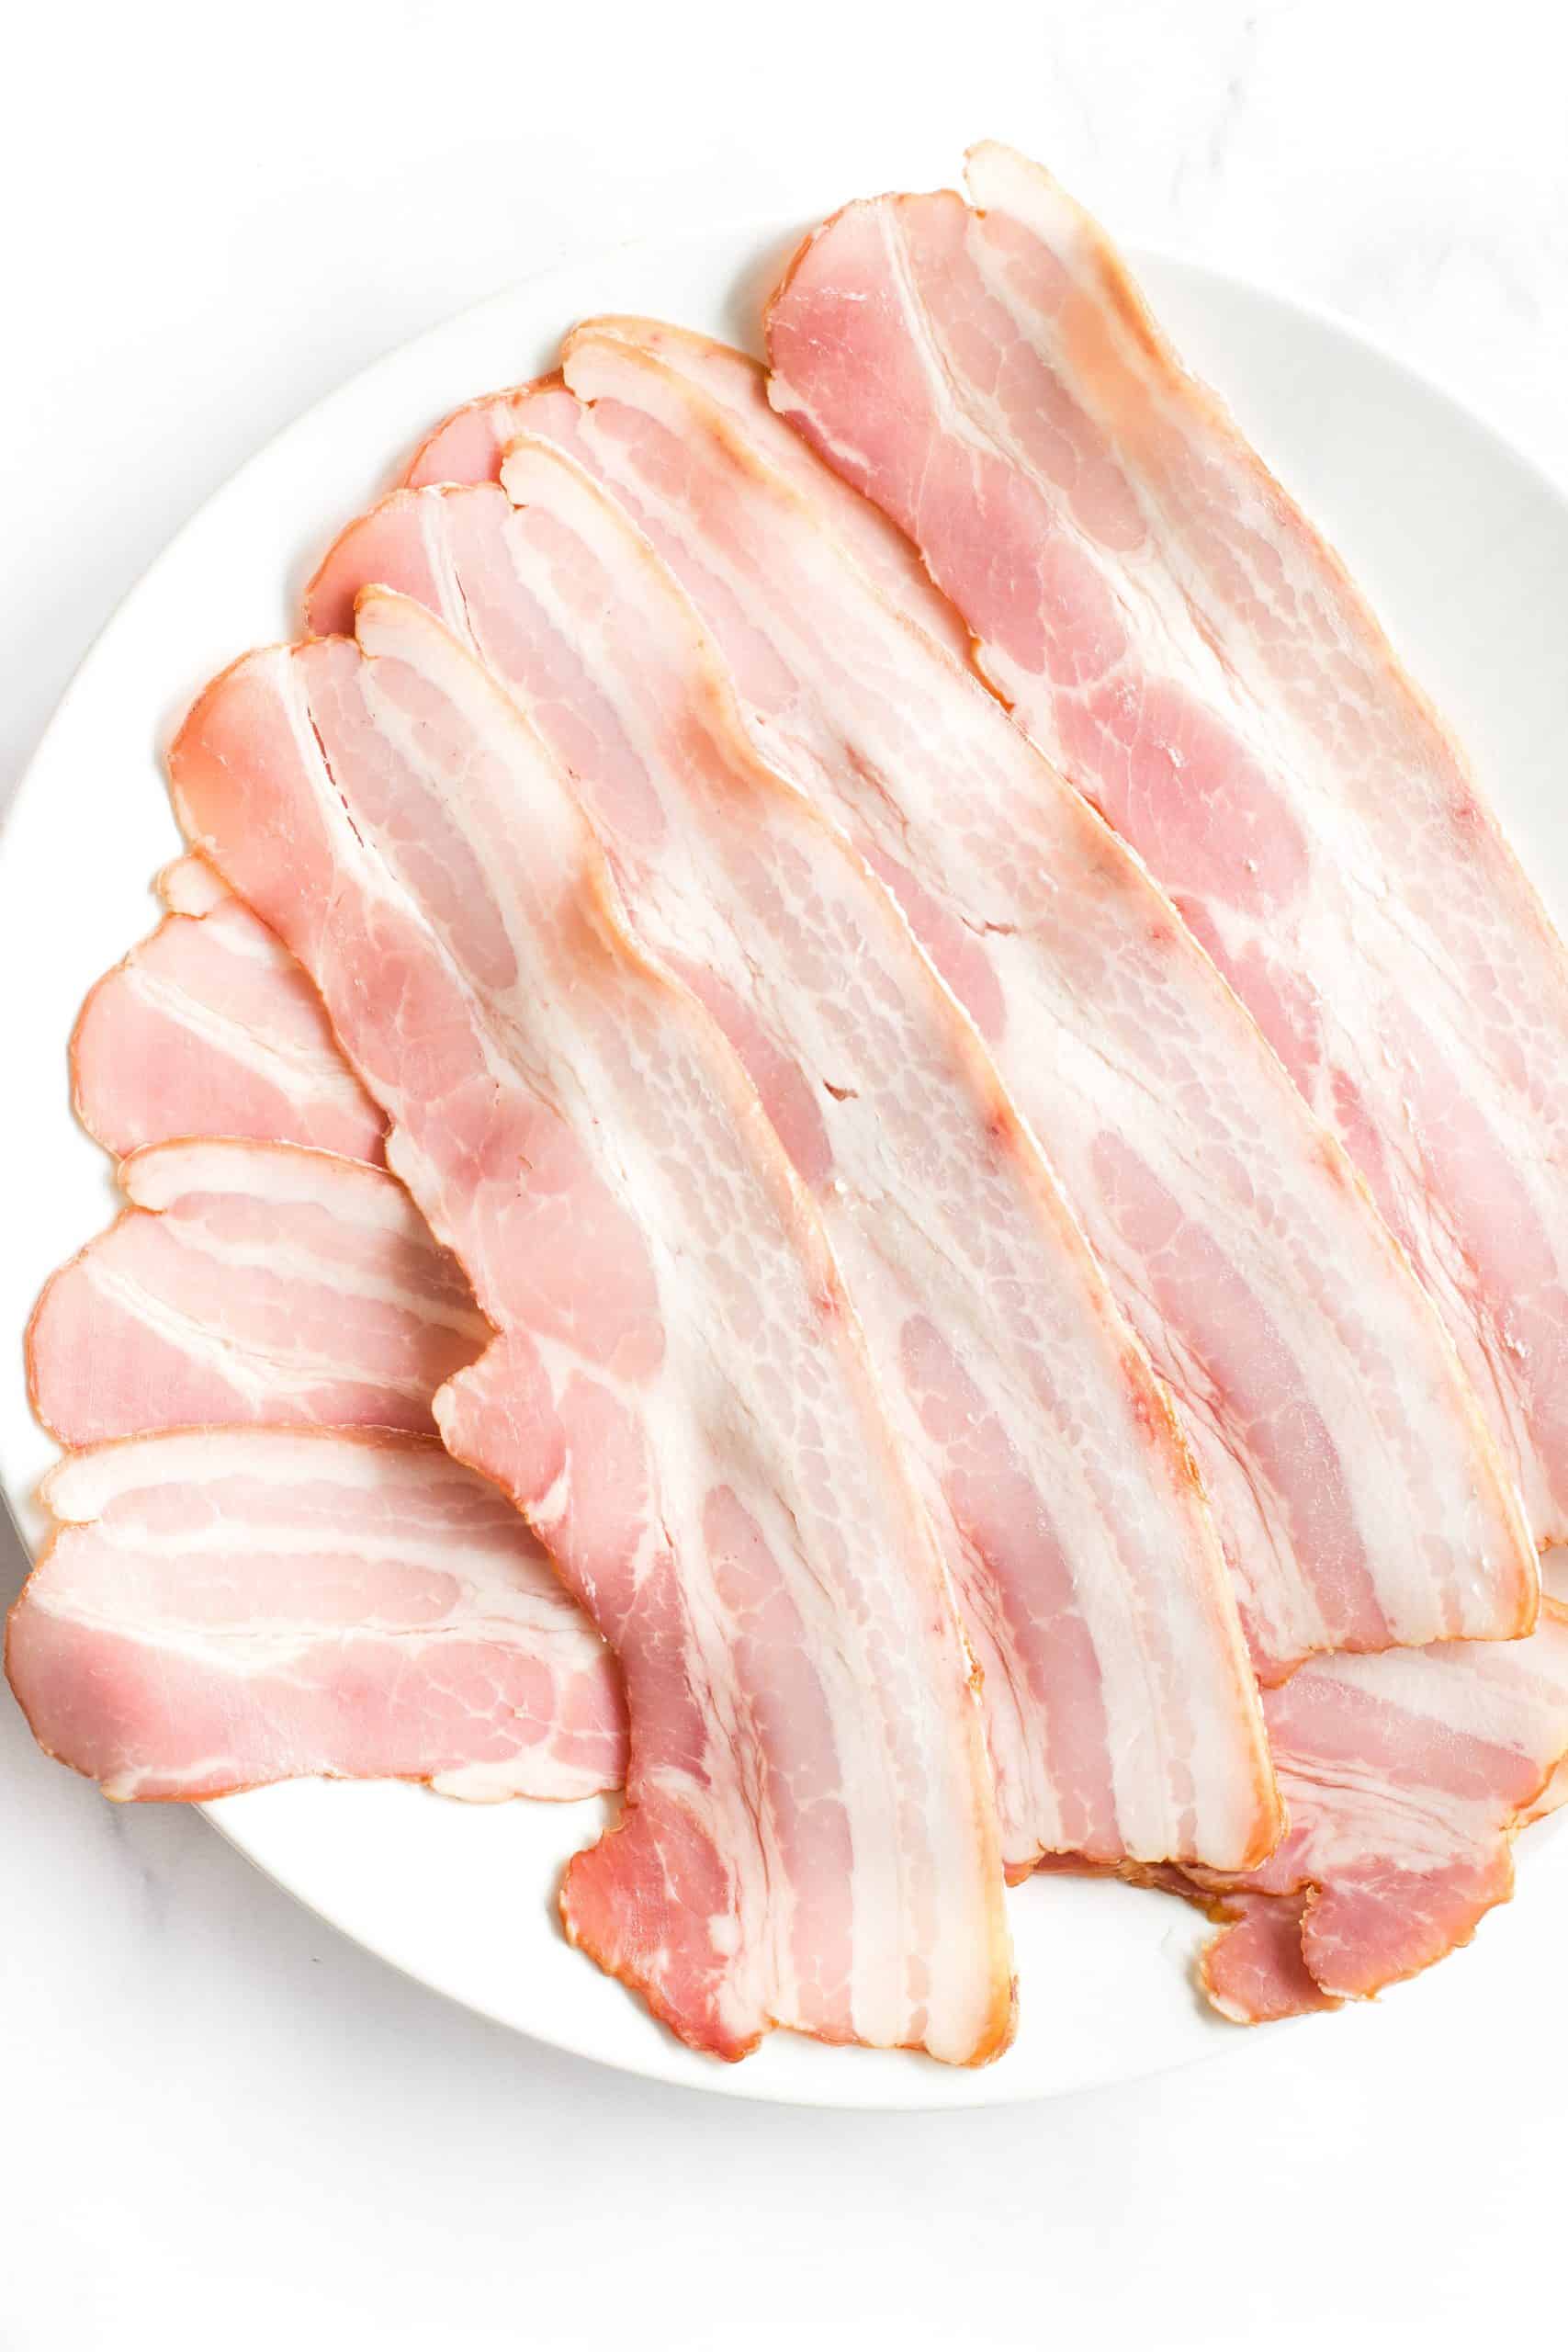 Uncooked bacon slices on a white plate.